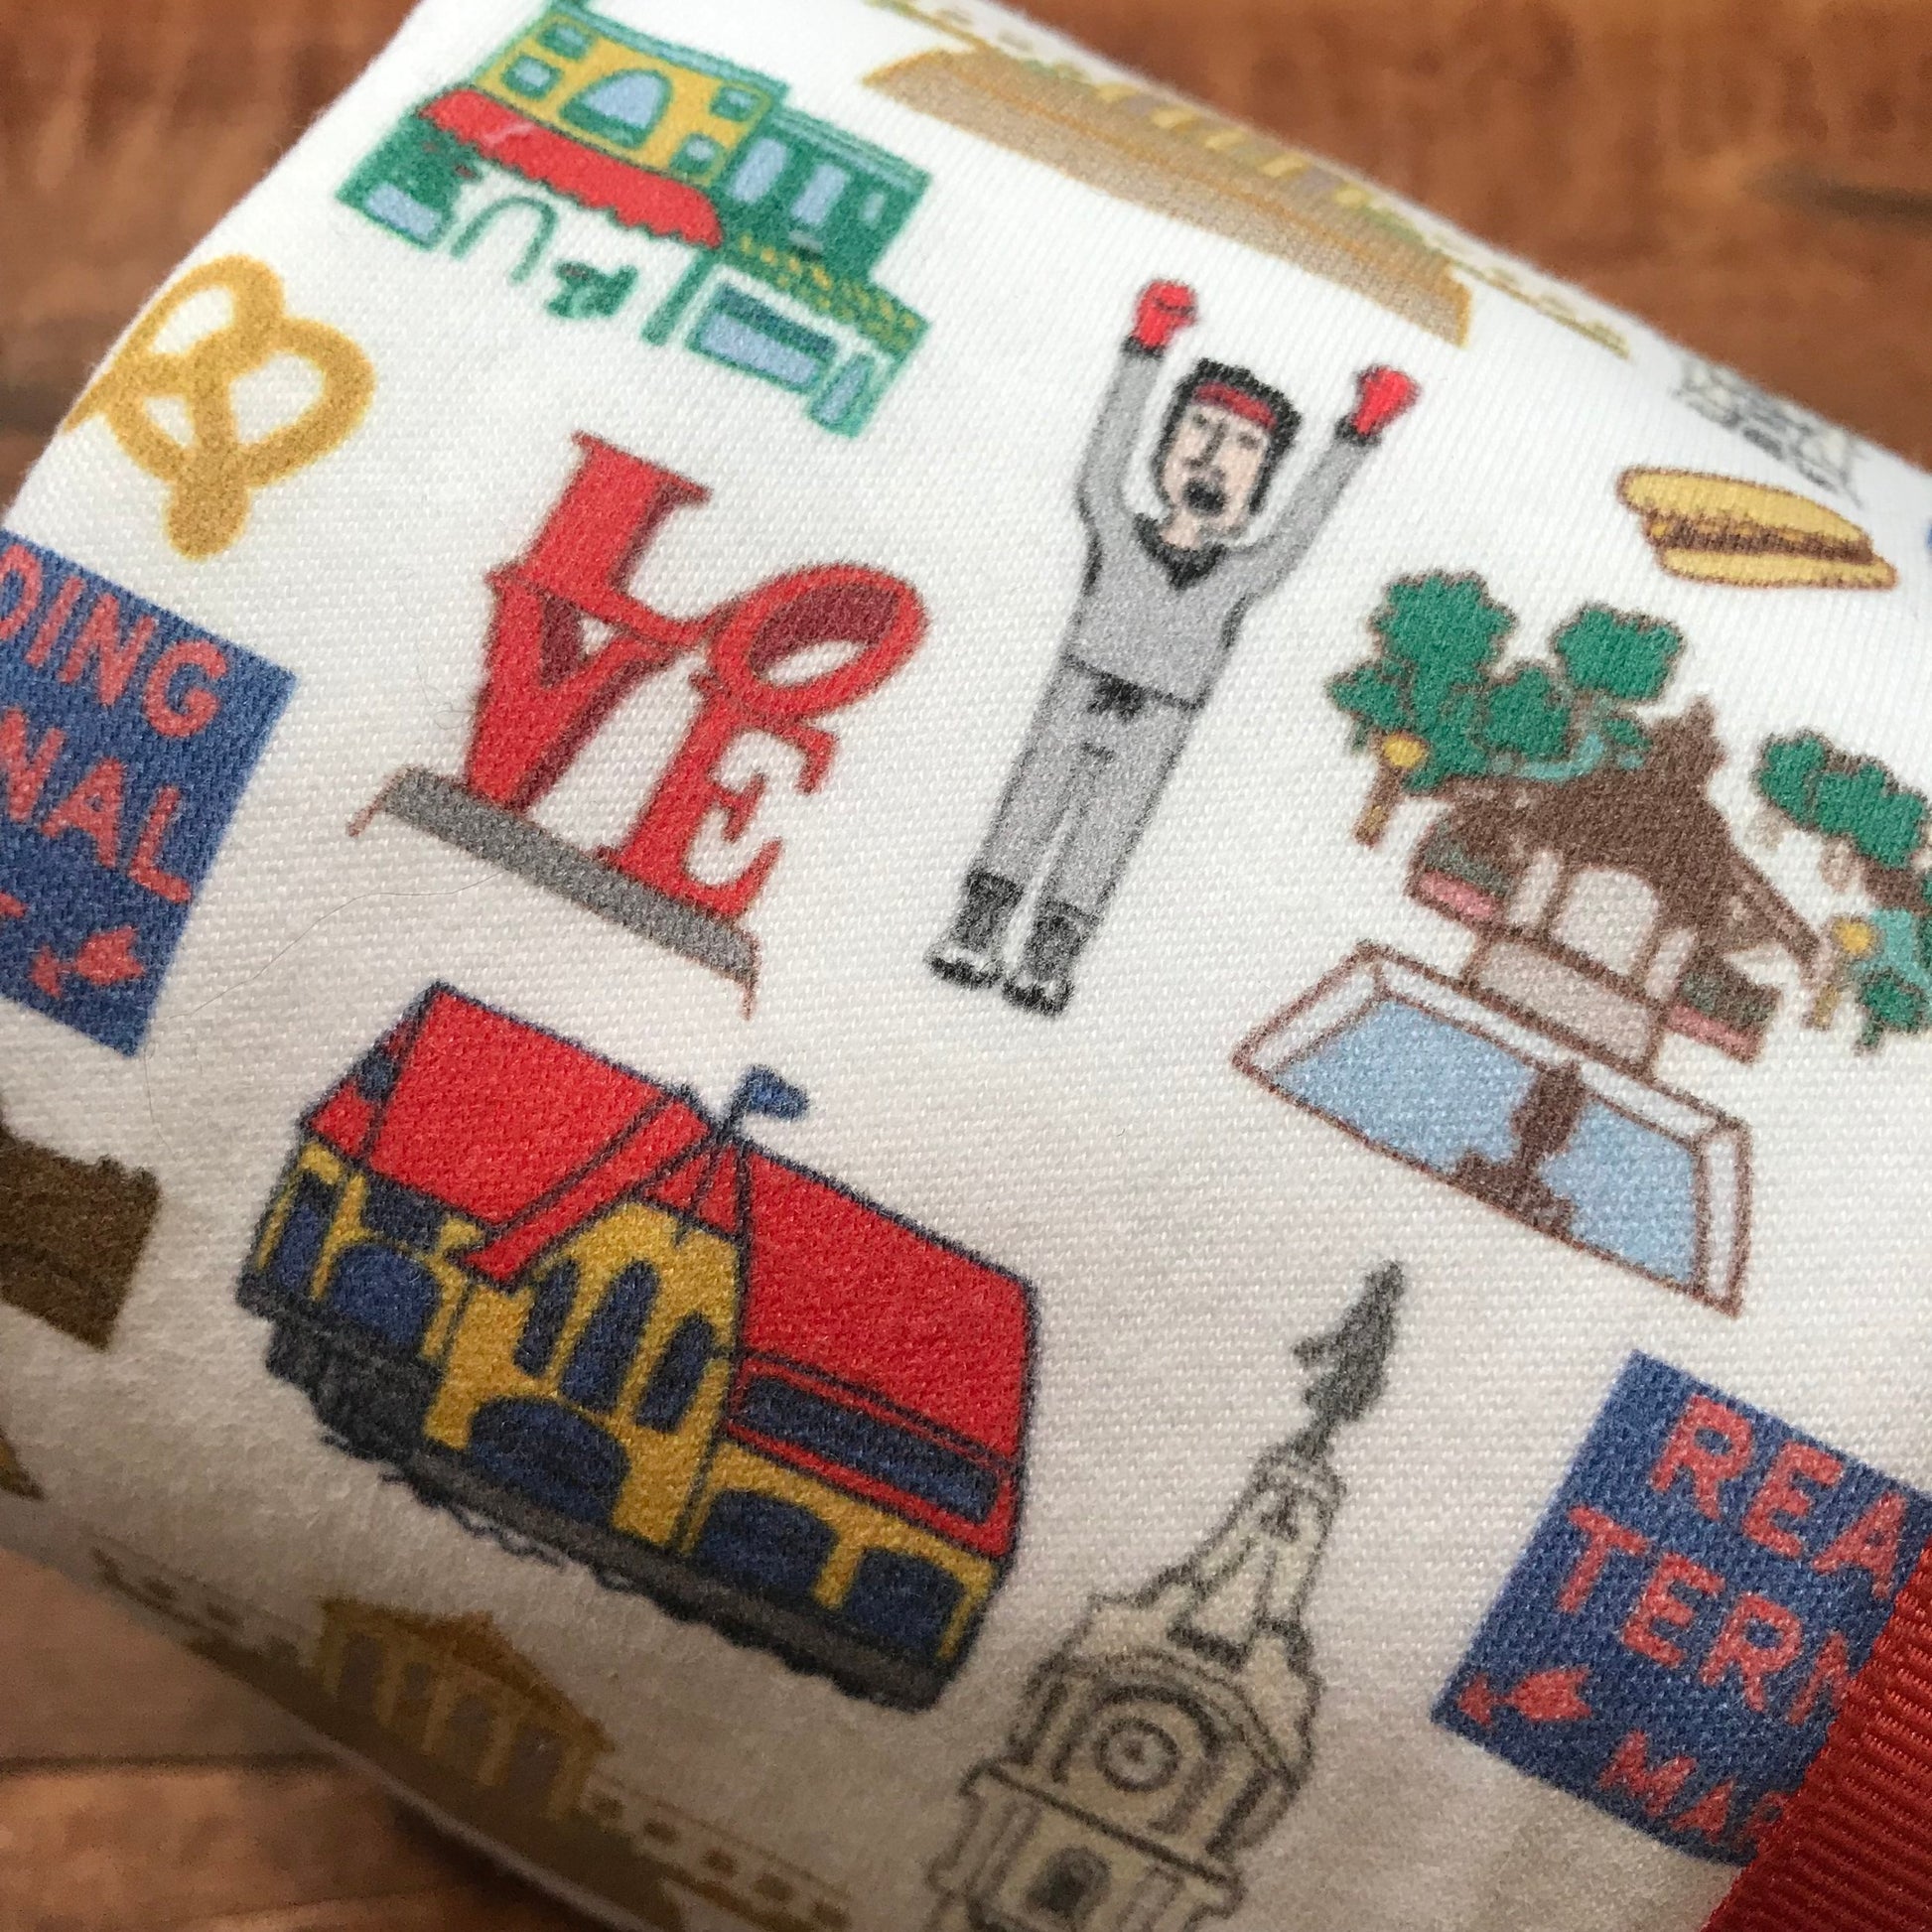 Patterned organic cotton fabric with a variety of colorful designs, including the word "love," an astronaut, vehicles, and other assorted symbols, like the Ana Thorne Philly Baby Blanket.